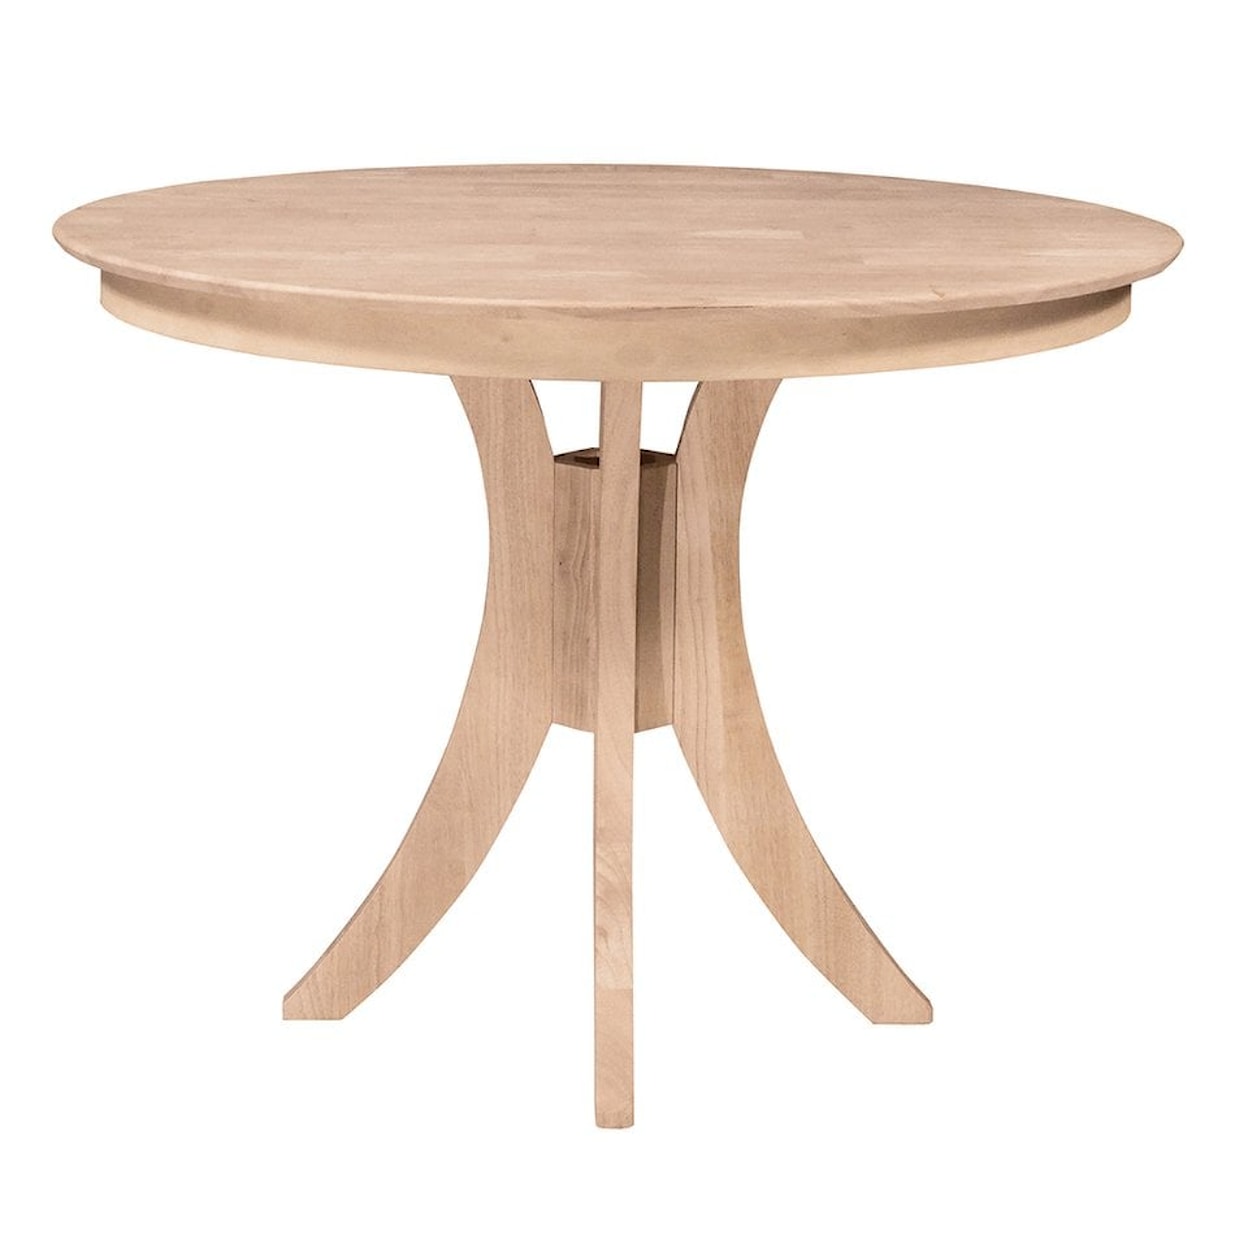 John Thomas SELECT Dining Room Sienna Round Solid Table